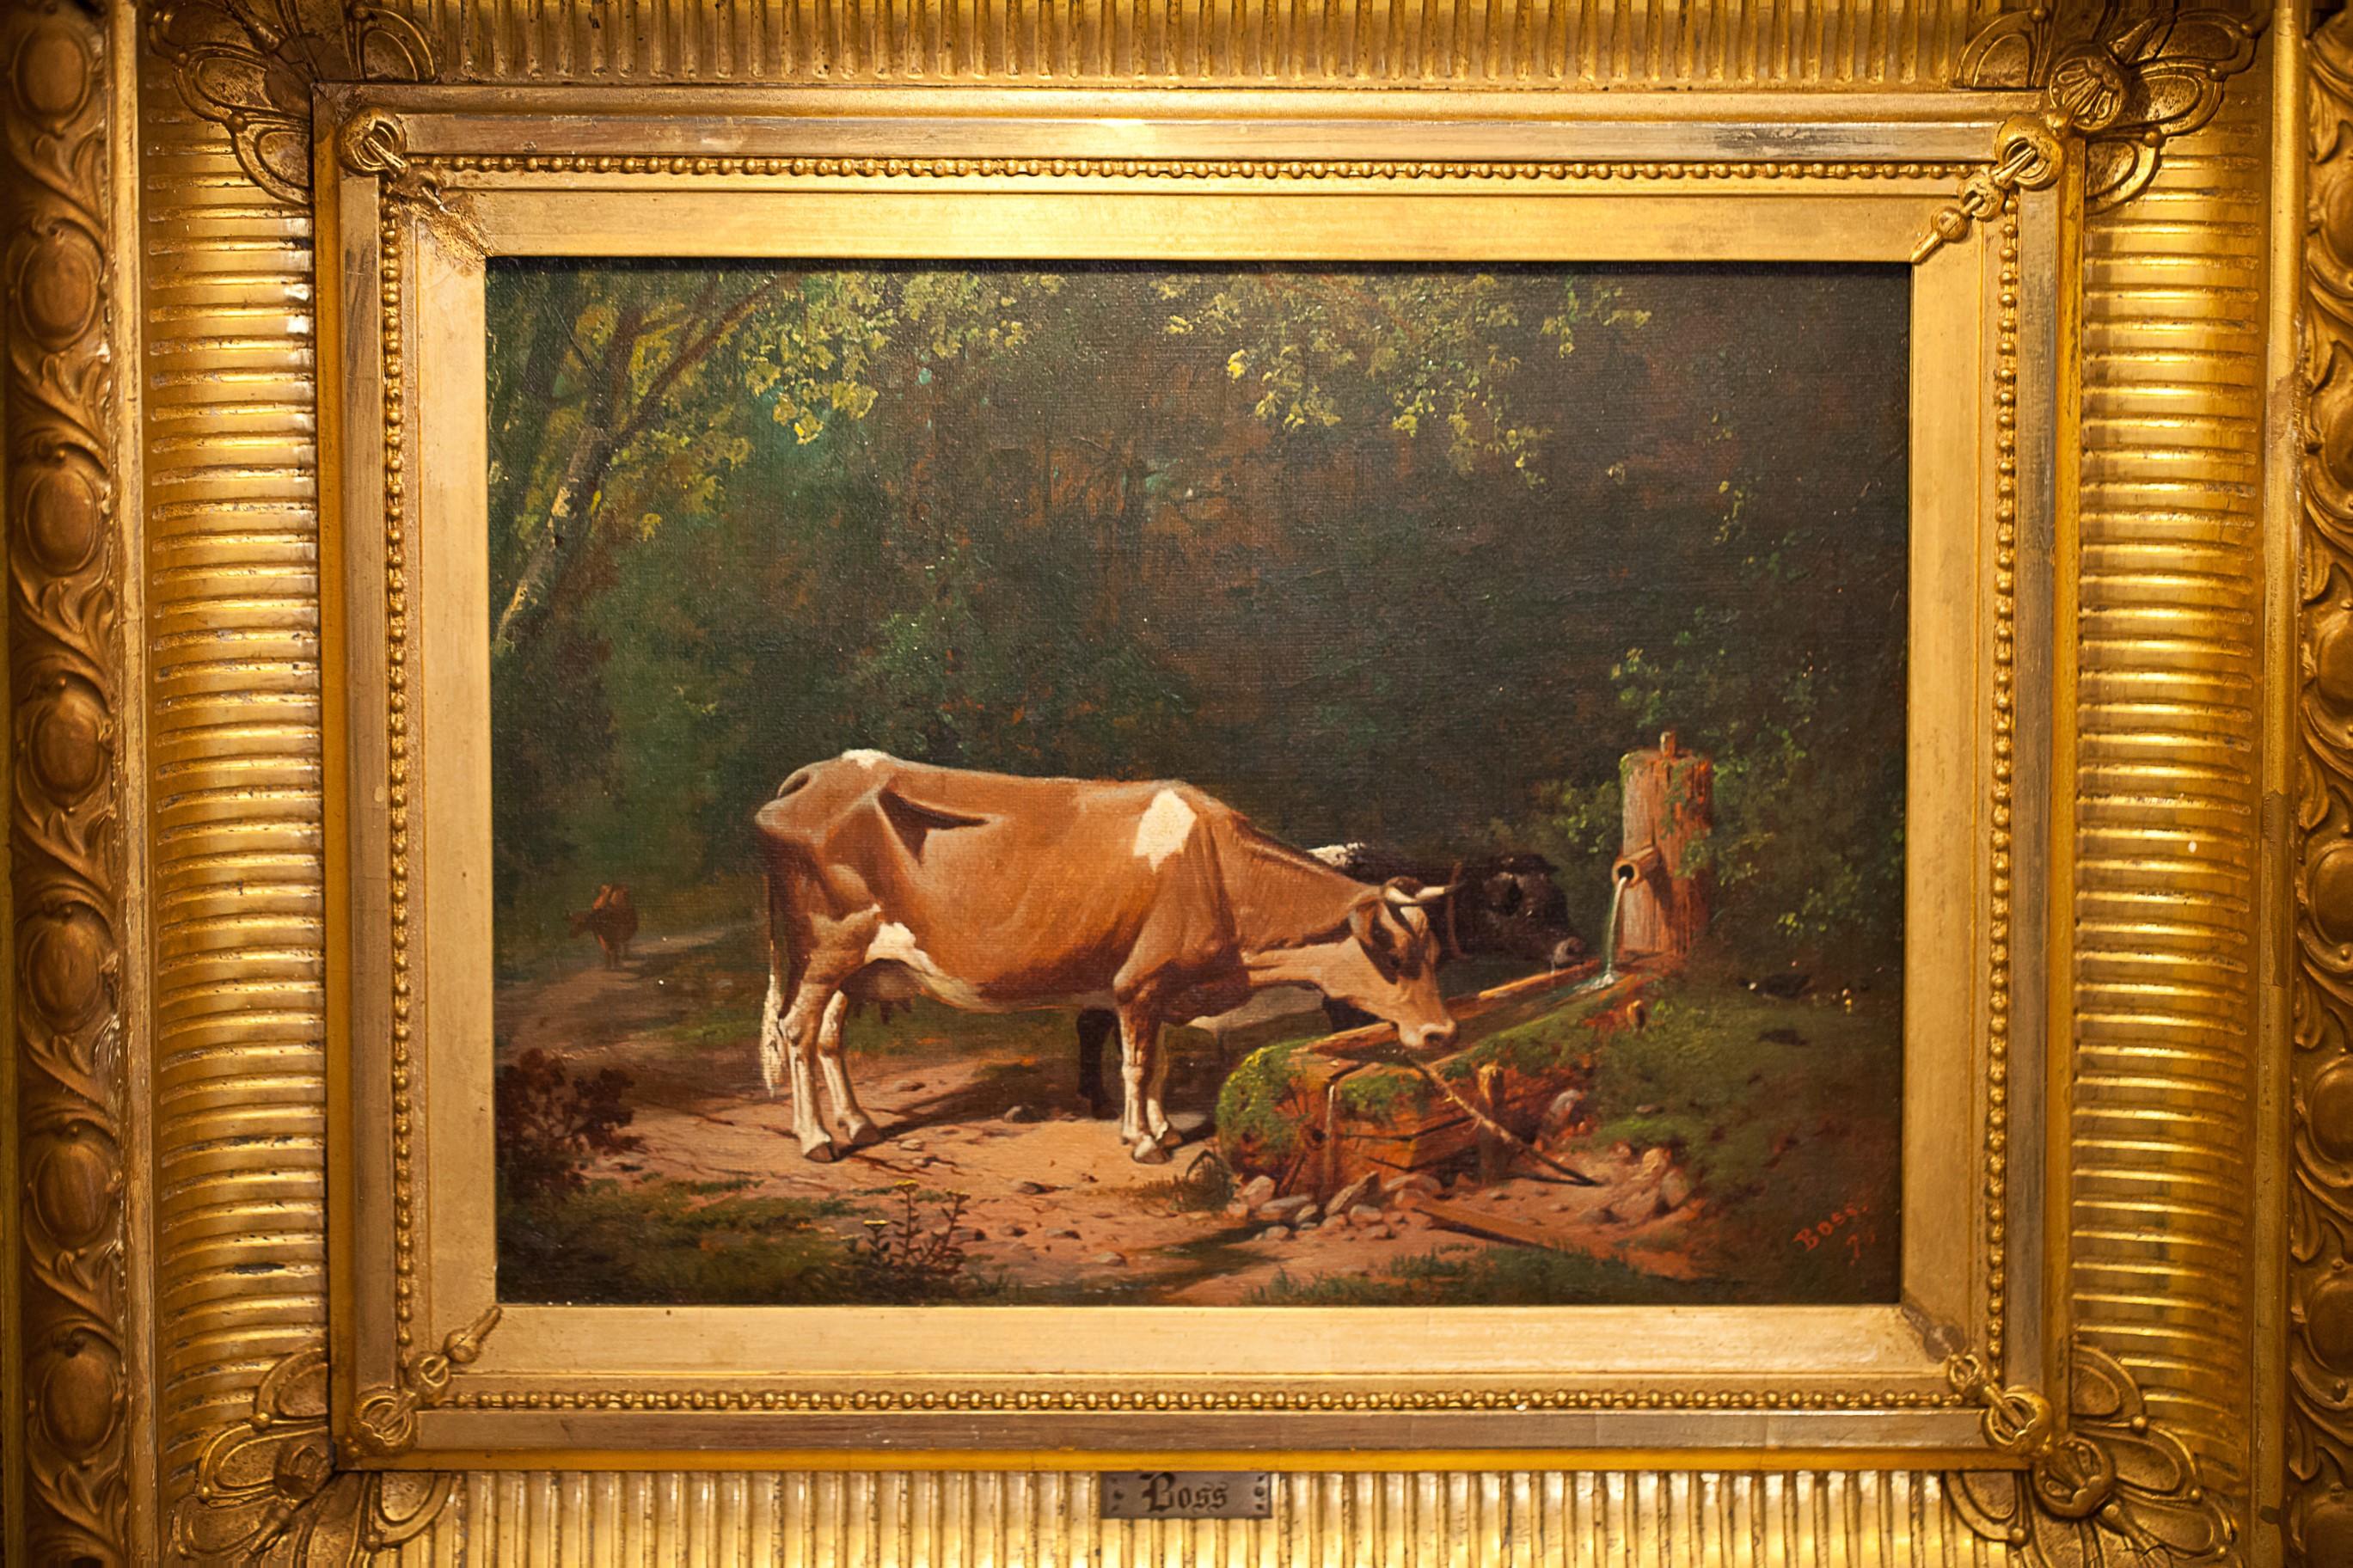 This bucolic scene is signed 